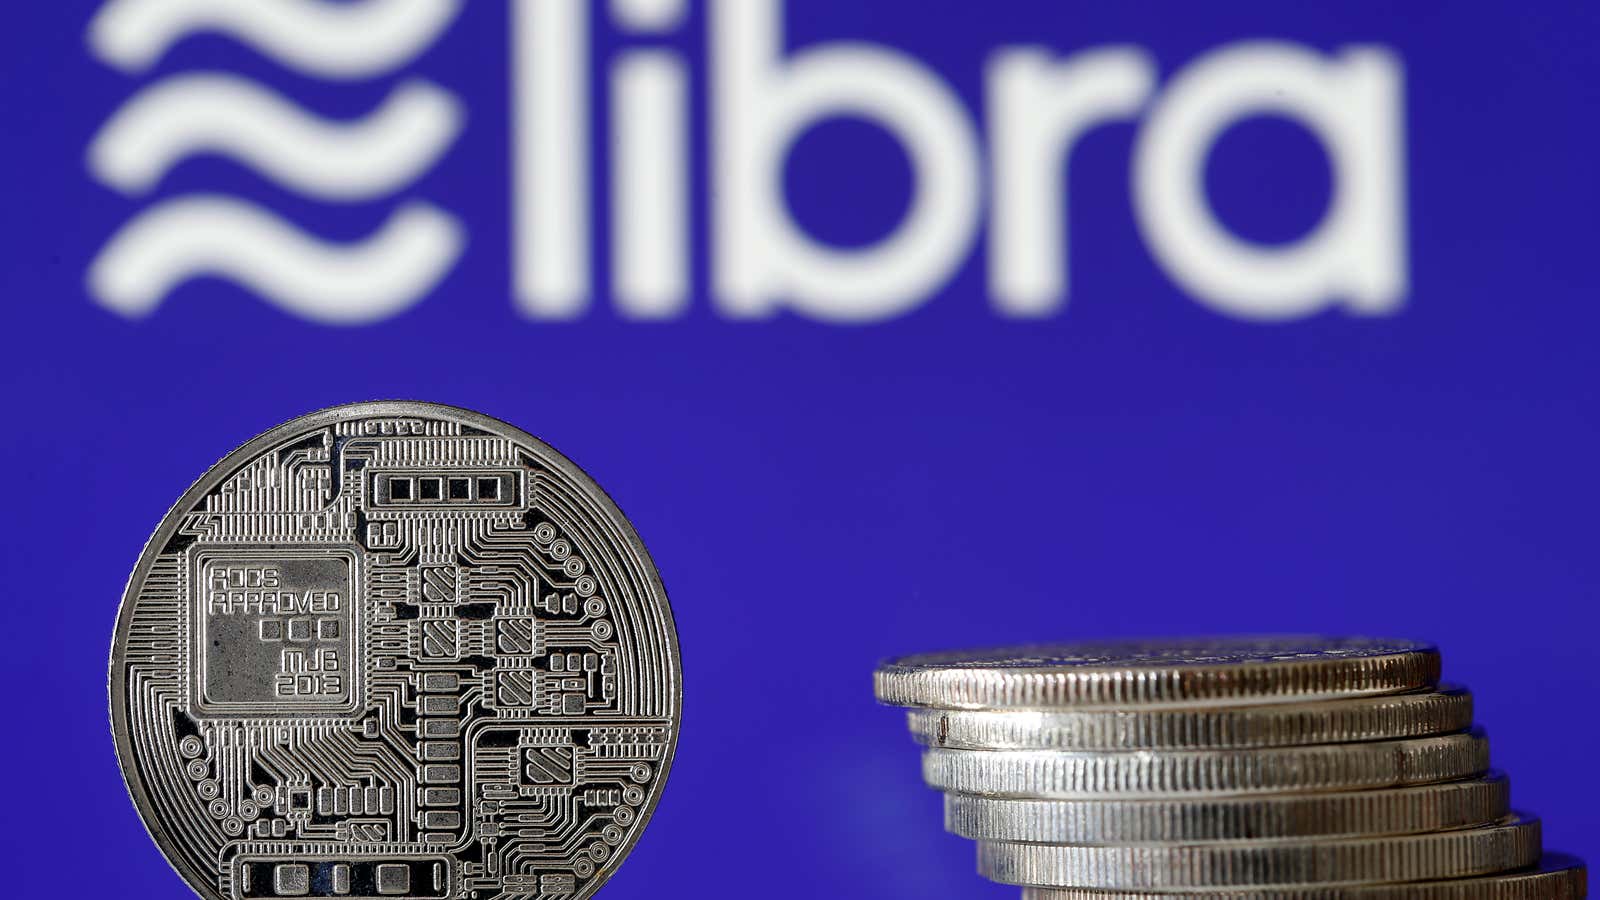 Facebook's New Libra Coin: How Does It Work, and Should You Buy It?